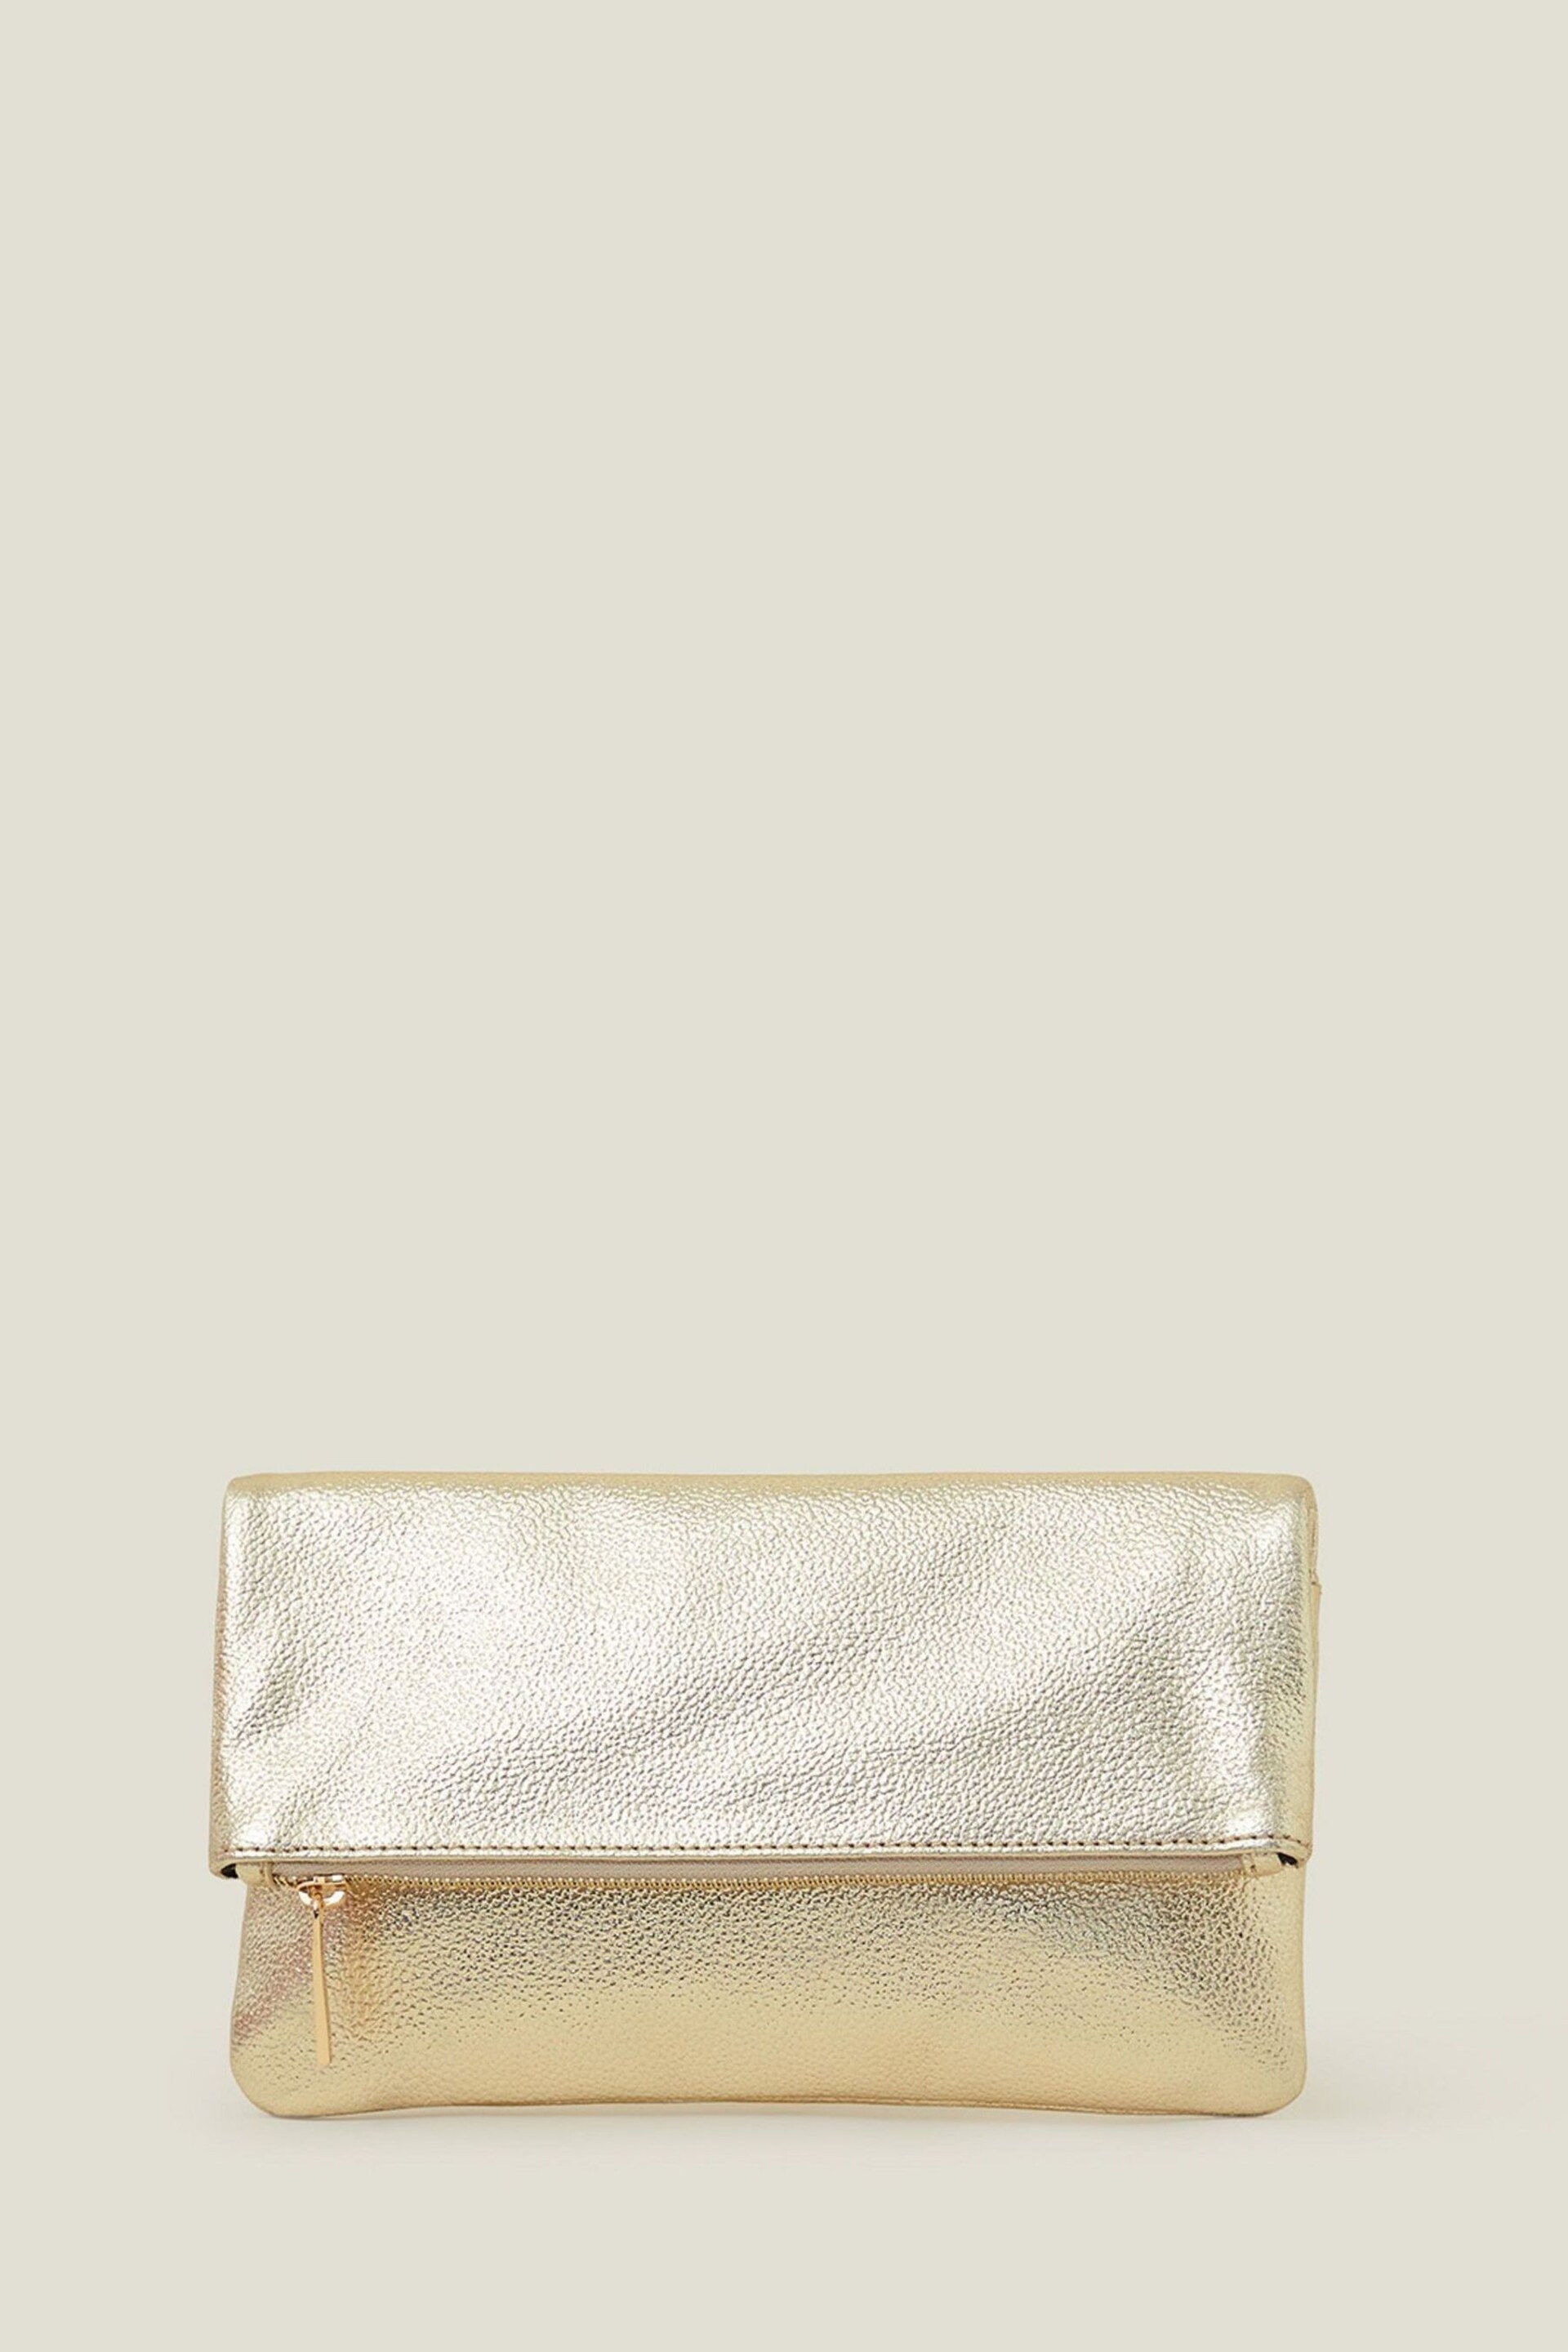 Accessorize Gold Leather Fold Over Clutch - Image 1 of 4